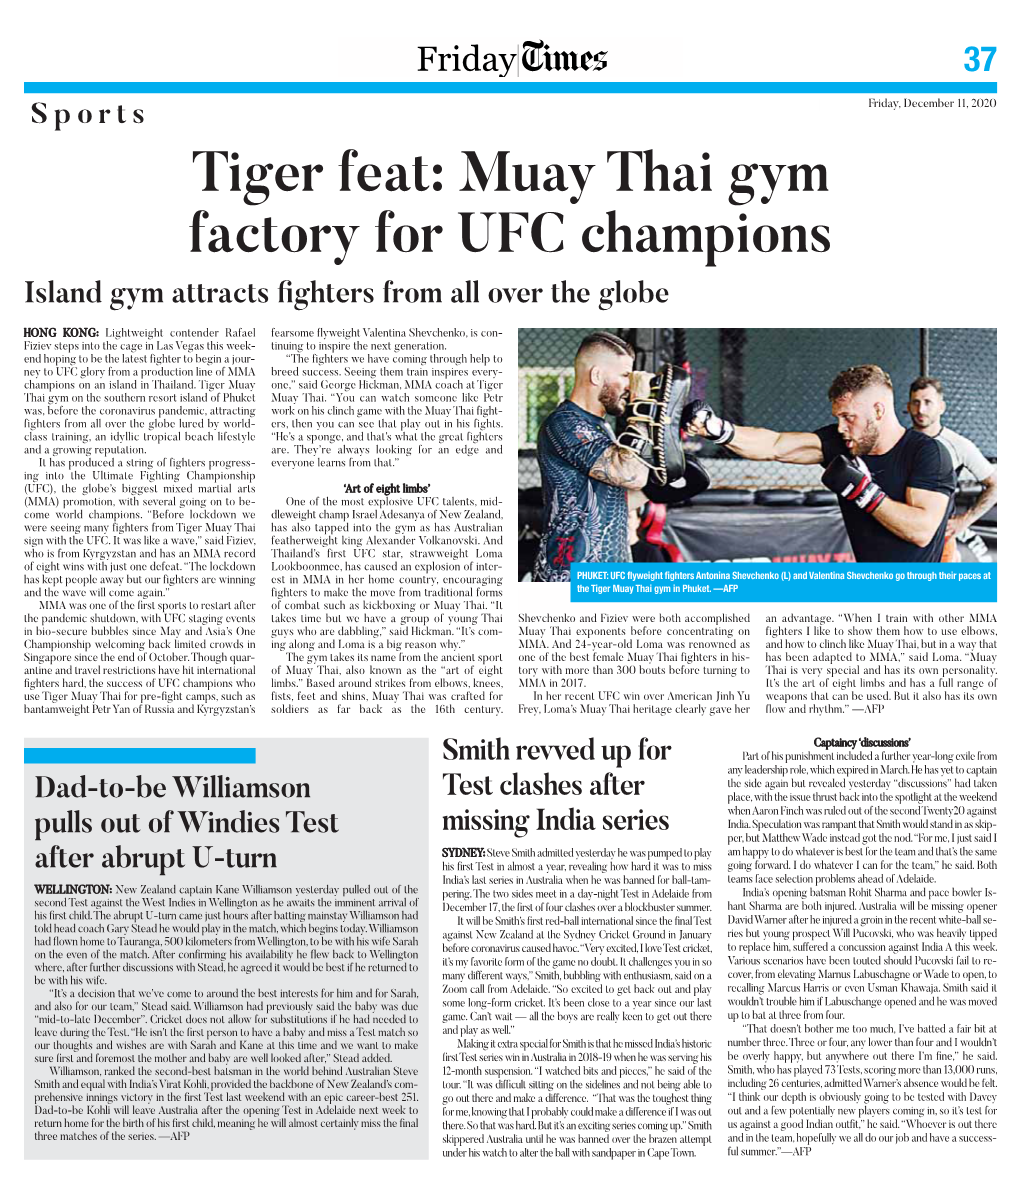 Muay Thai Gym Factory for UFC Champions Island Gym Attracts Fighters from All Over the Globe